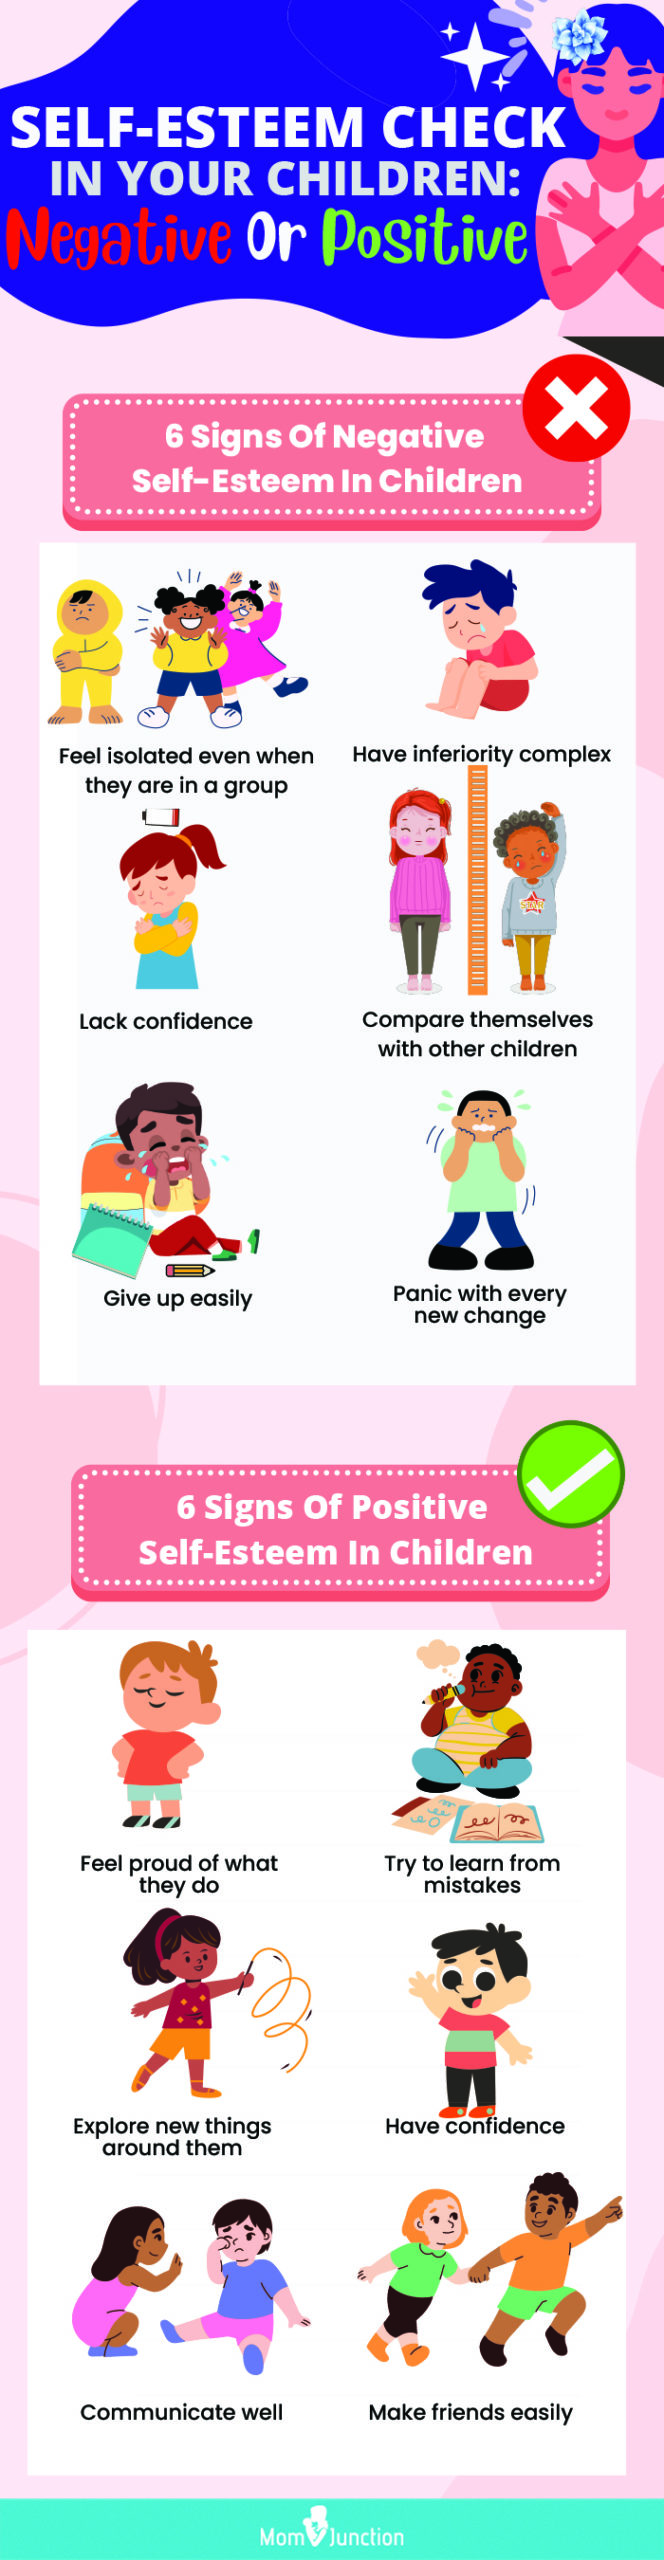 self-esteem check in your children negative or positive (infographic)